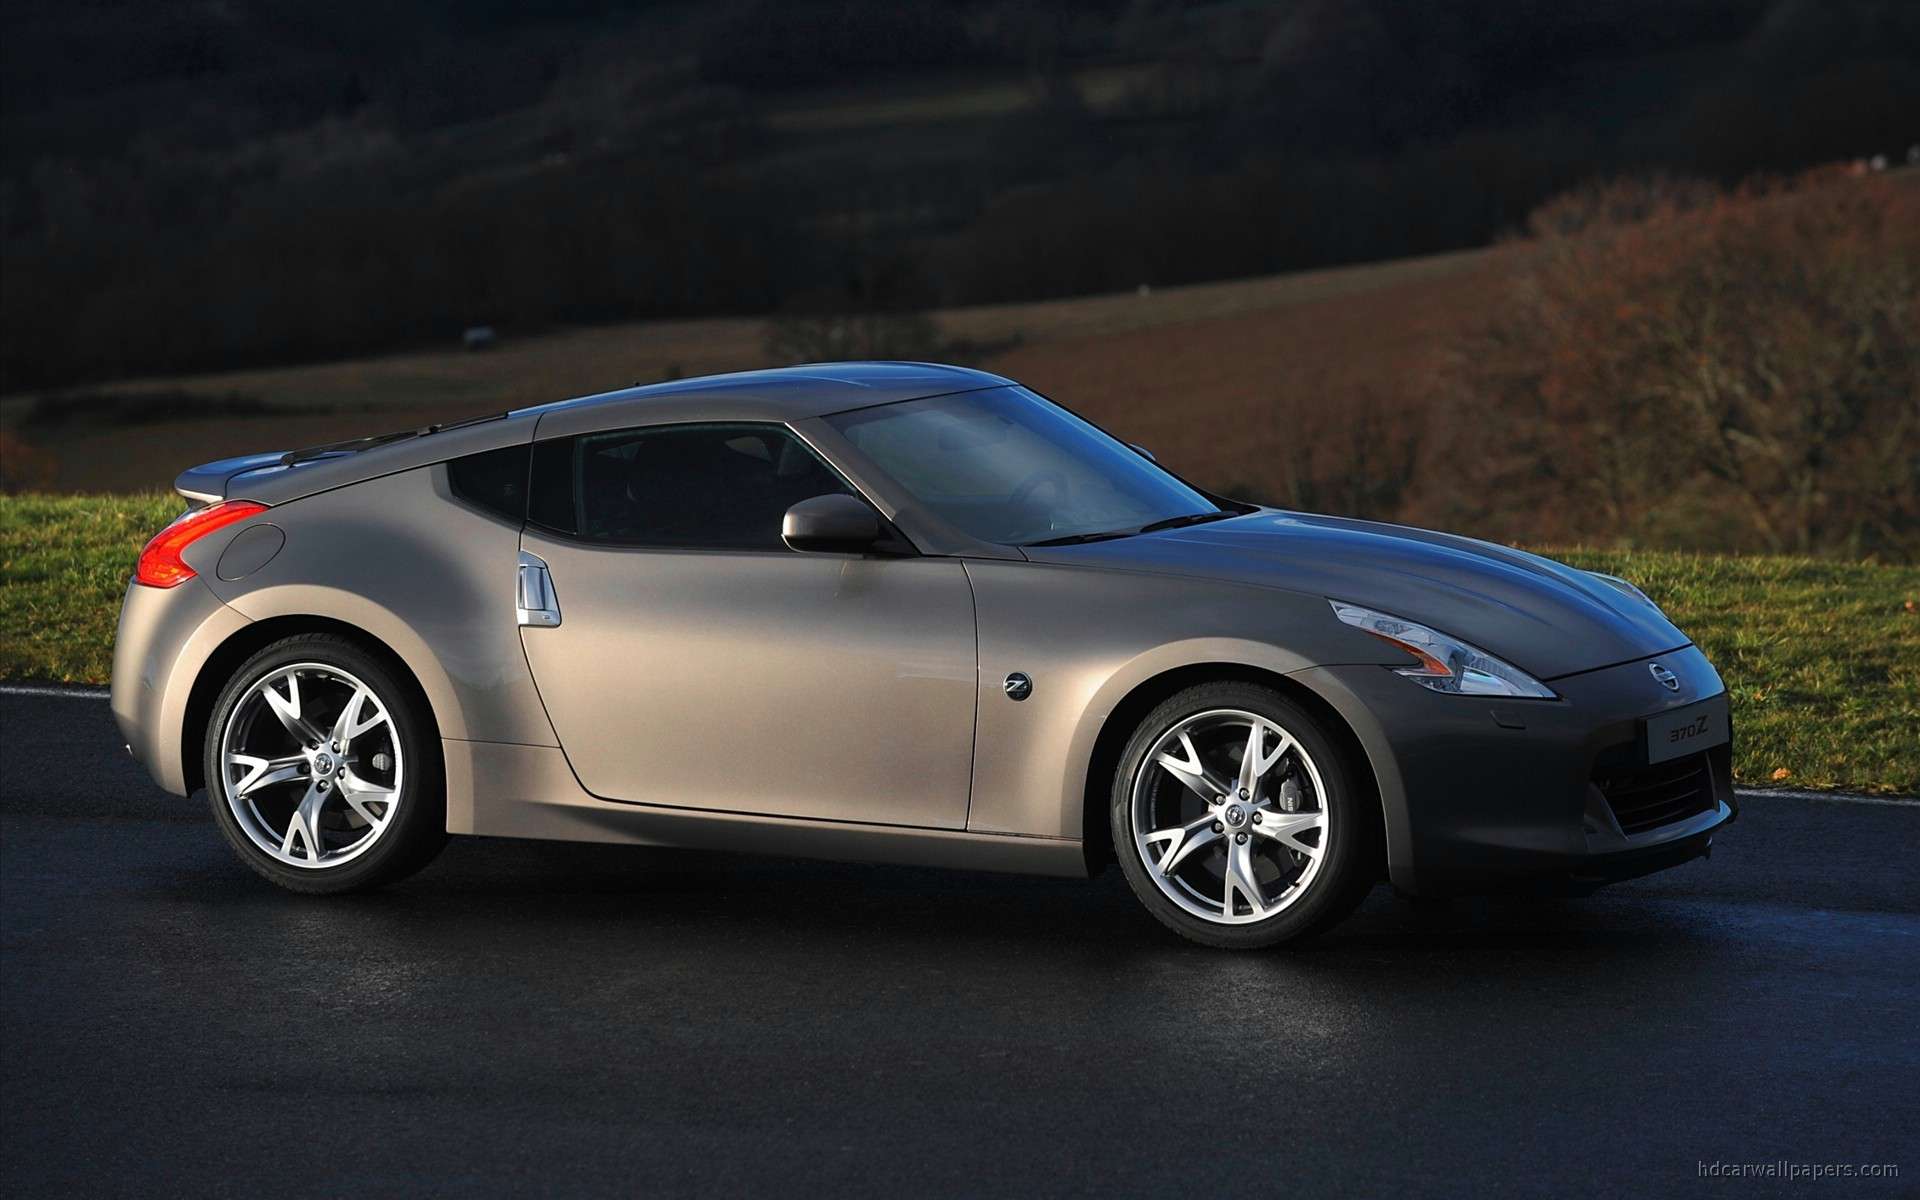 View Of Nissan 370z New Hd Wallpapers Hd Wallpapers 1920x1200